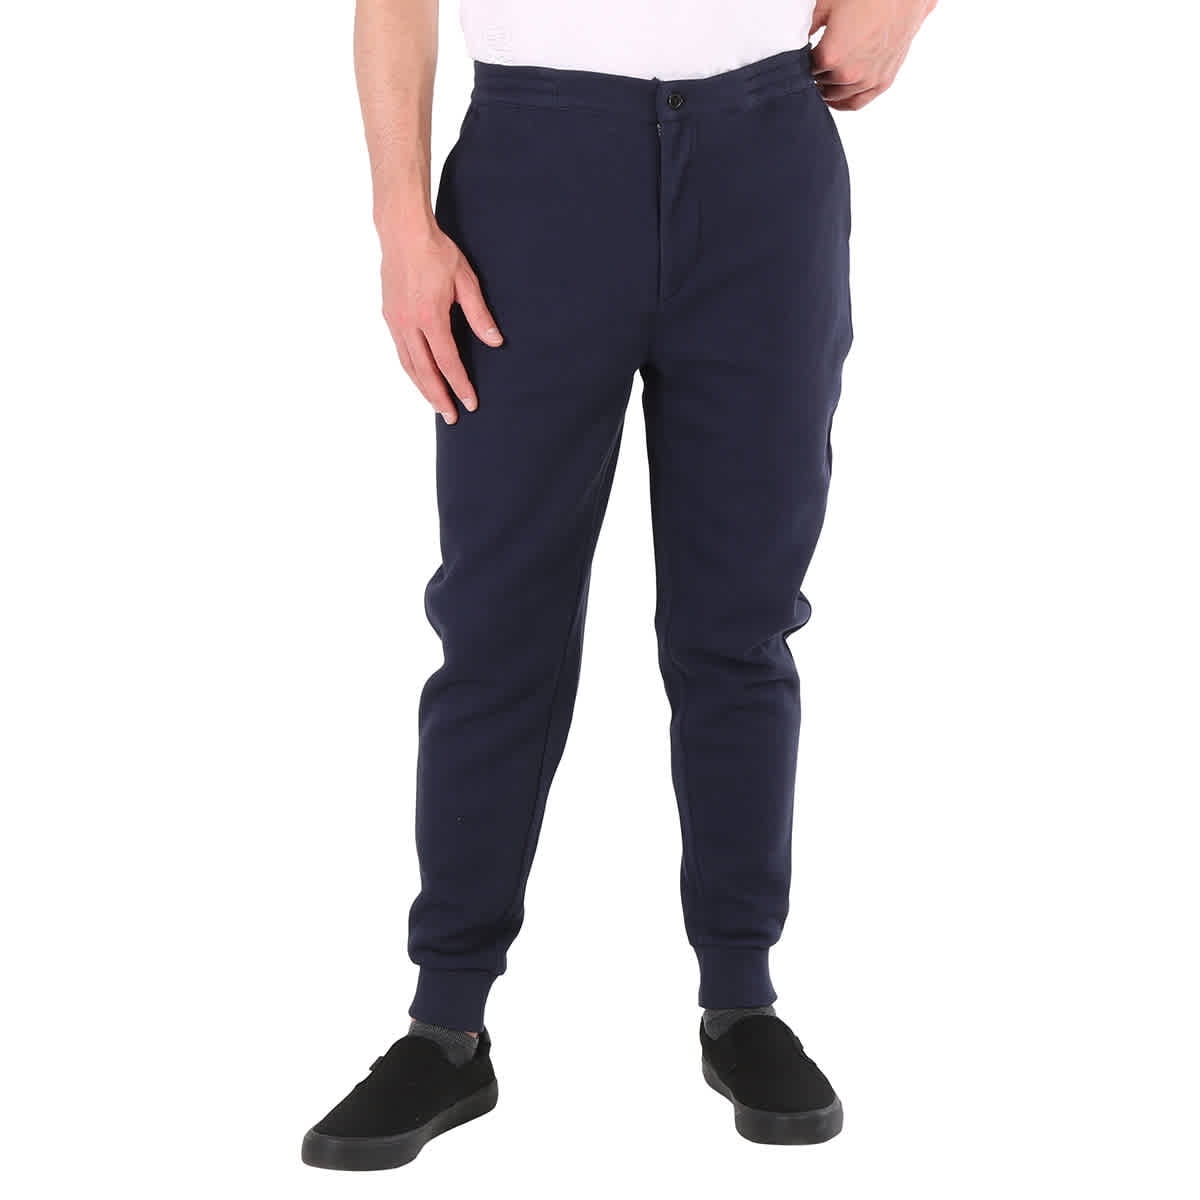 Men's S.S. Polo Jumpsuit w/ Lt. Weight Knit Pants Adaptive Clothing for  Seniors, Disabled & Elderly Care